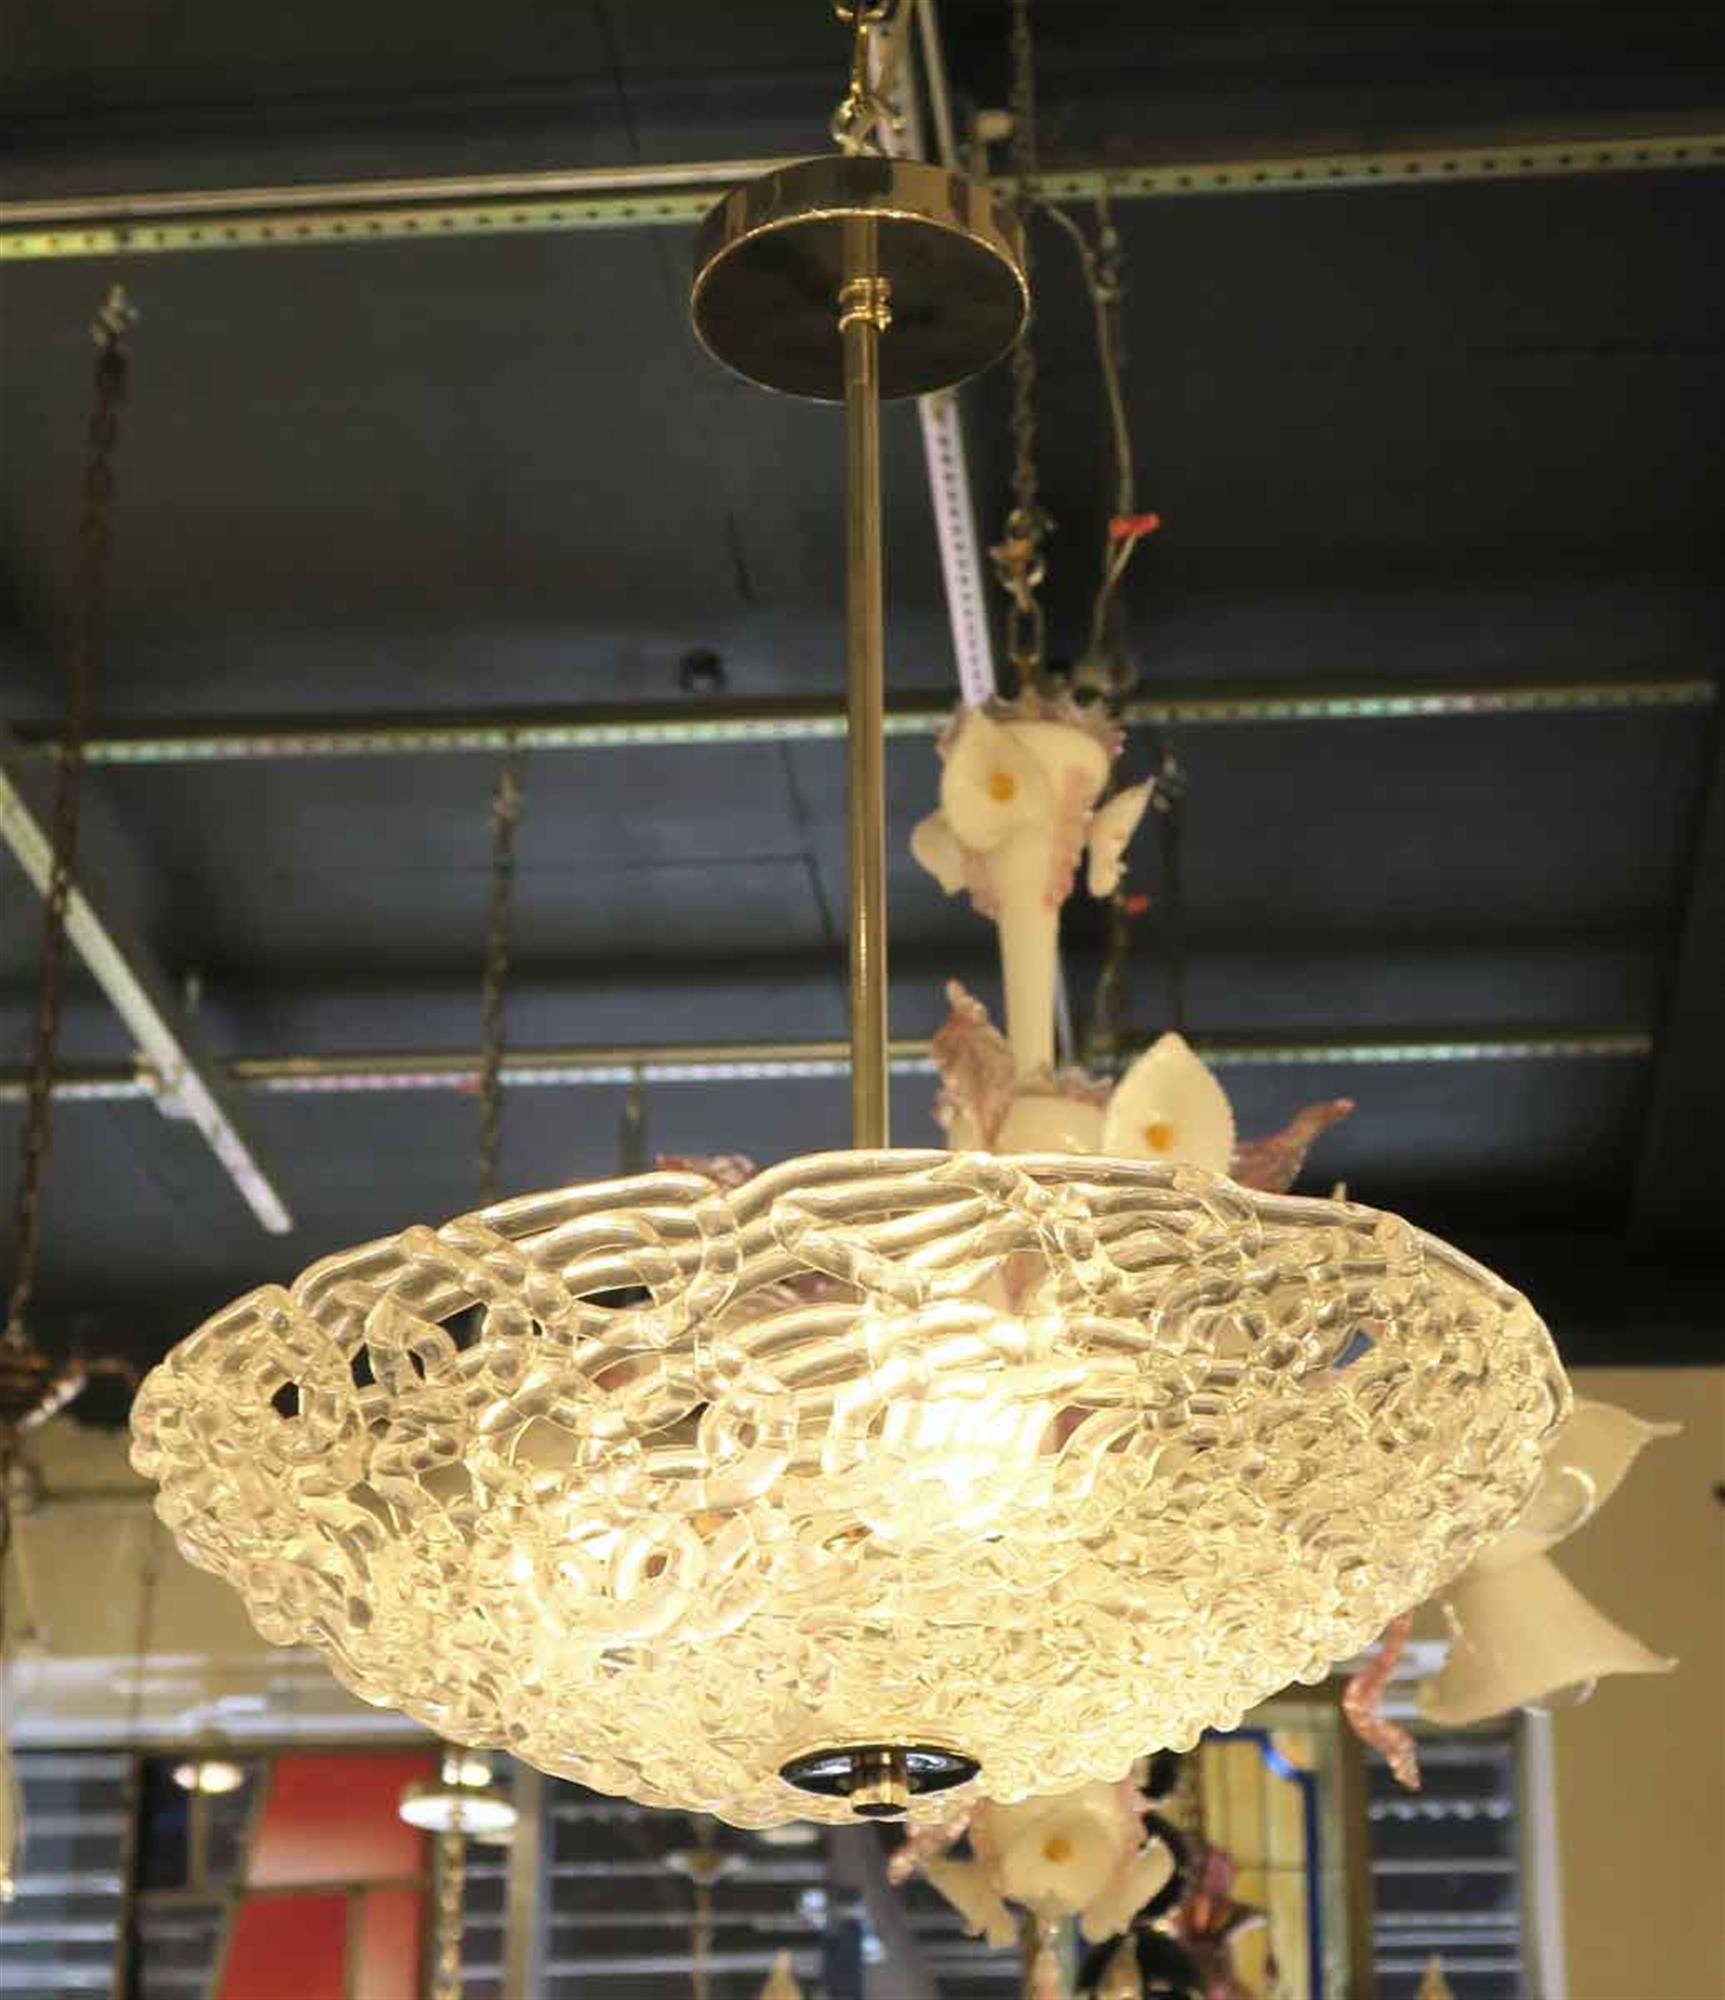 Blown glass contemporary Mid-Century Modern dish light with lattice styling with a brass fixture. This can be seen at our 2420 Broadway location on the upper west side in Manhattan.